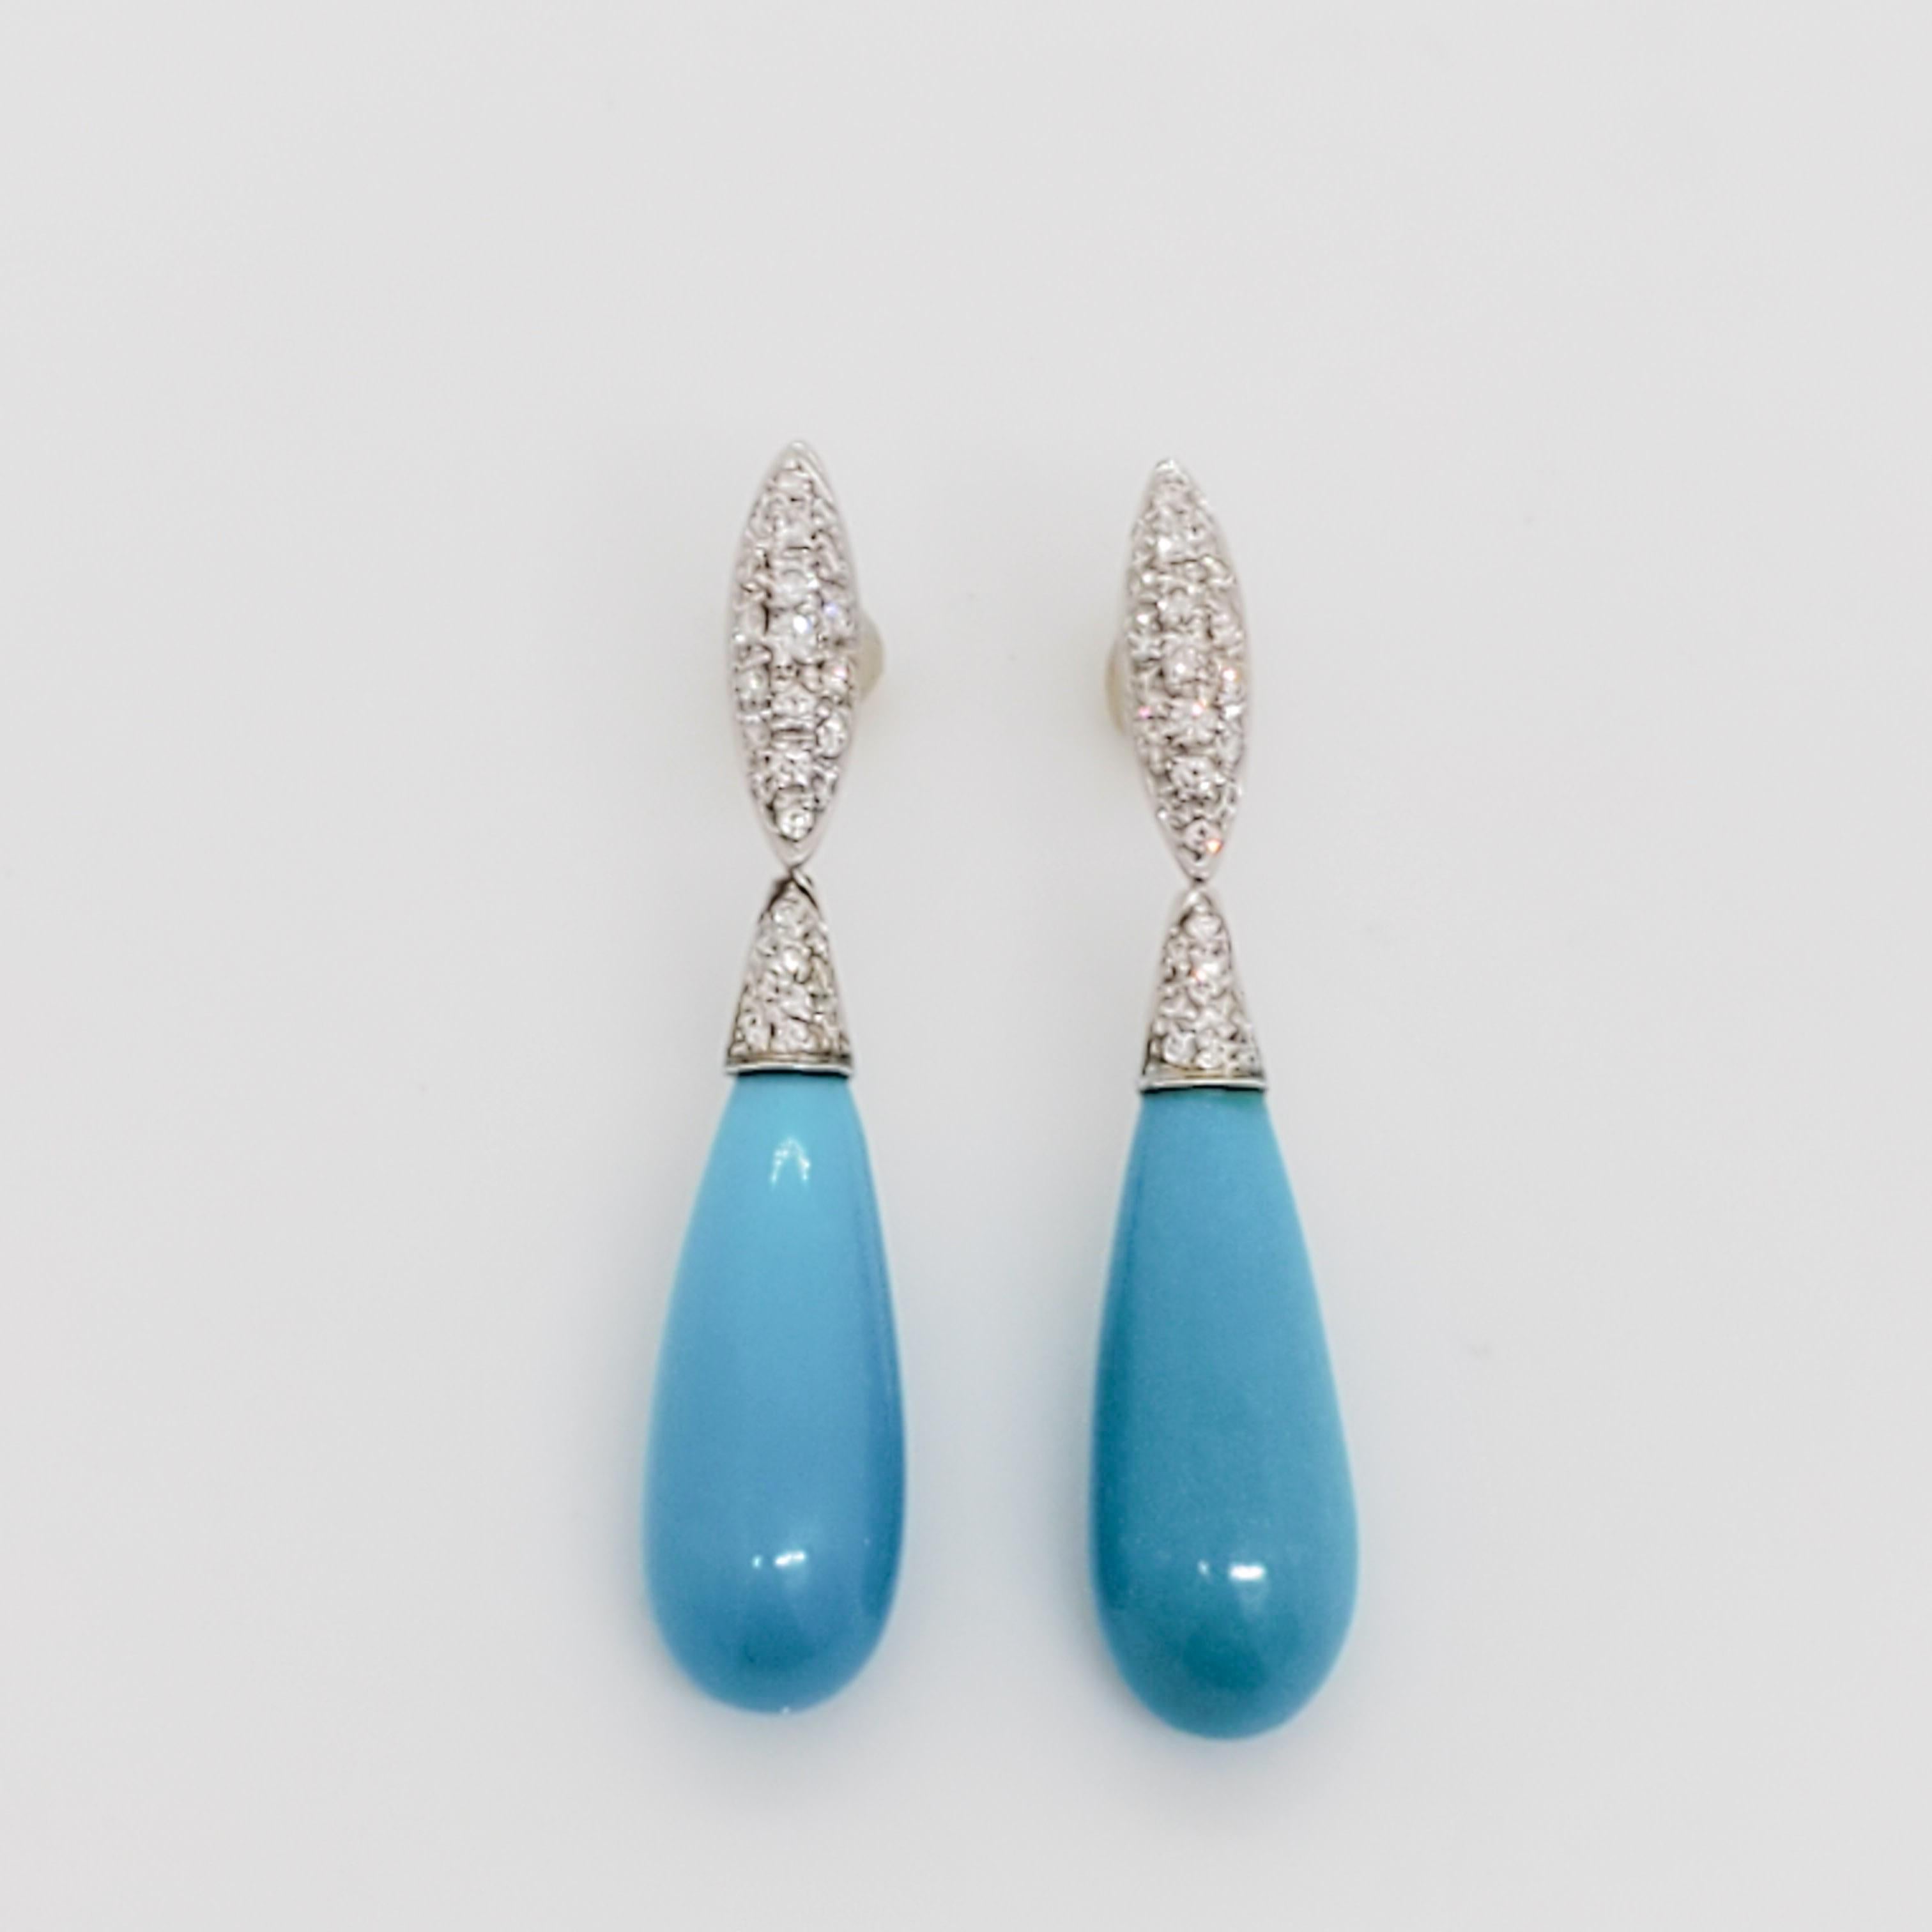 Beautiful earrings with 2.30 ct. of bright blue turquoise drops and 0.32 ct. good quality white diamond rounds.  Handmade in 18k white gold.  Made in Italy.